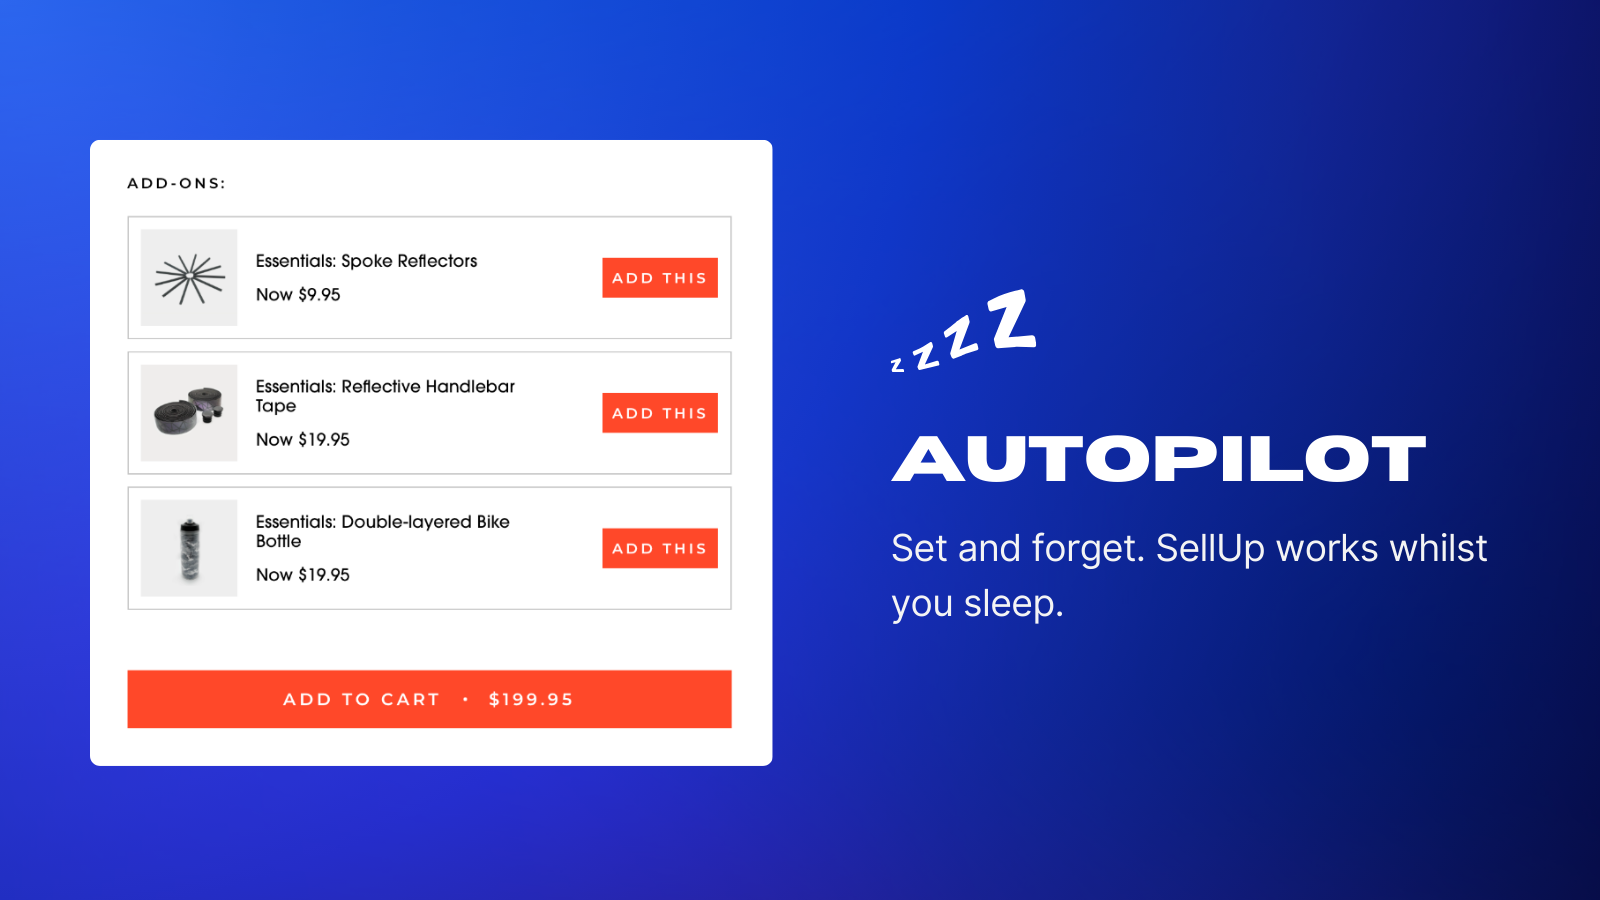 Upsell on autopilot with recommendations